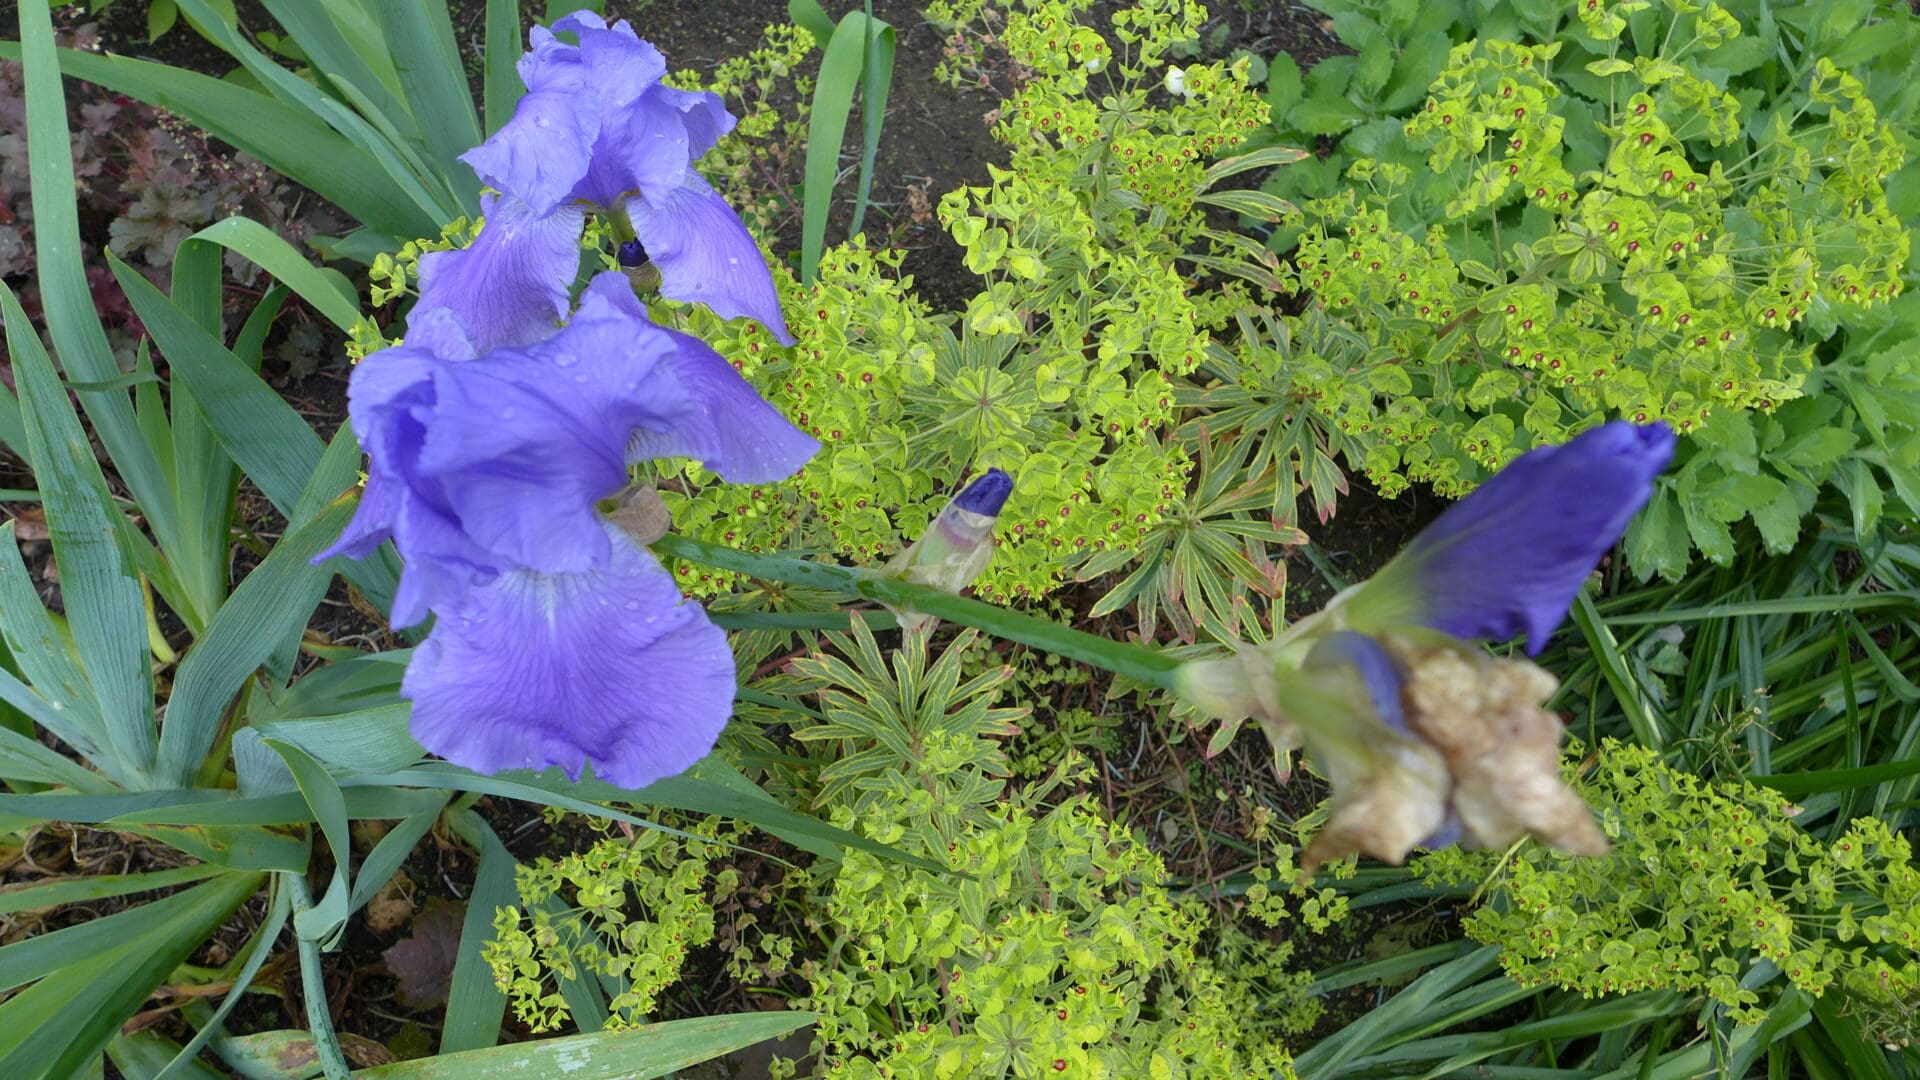 A close up of some purple flowers and green plants